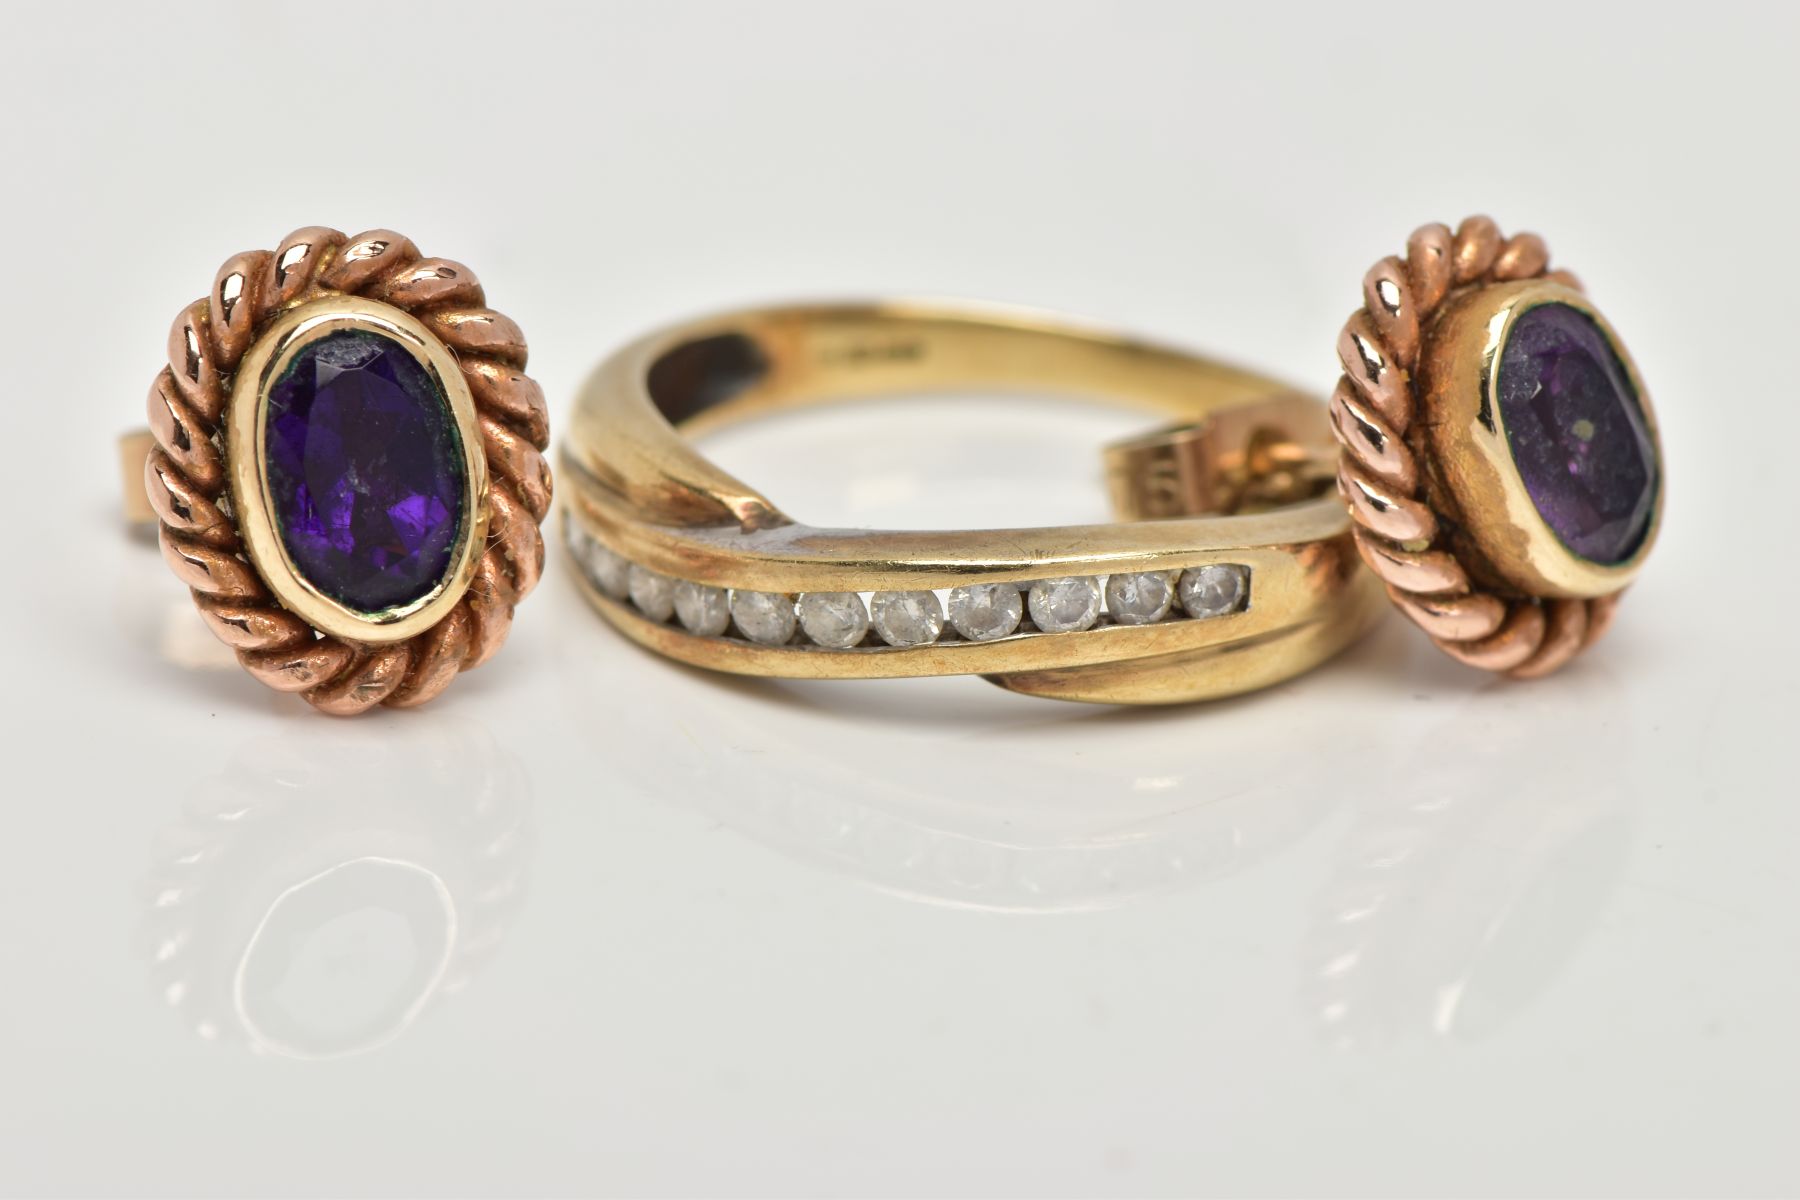 A 9CT GOLD DIAMOND HALF ETERNITY RING AND A PAIR OF 9CT GOLD AMETHYST EARRINGS, the ring of a - Image 3 of 3